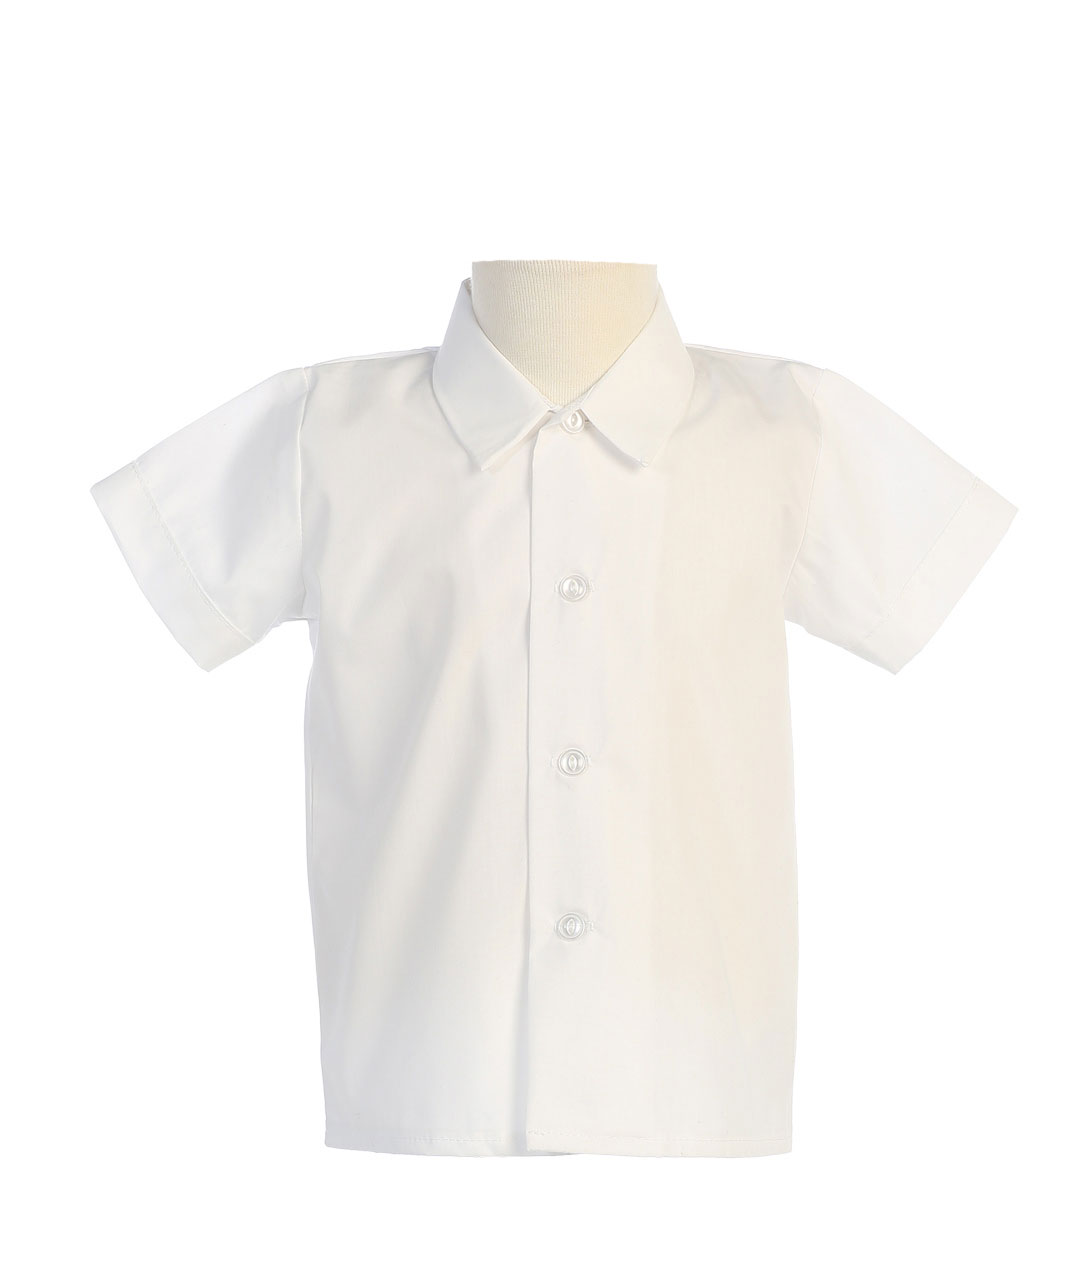 Boys Short Sleeved Simple Dress Shirt - Available in White S